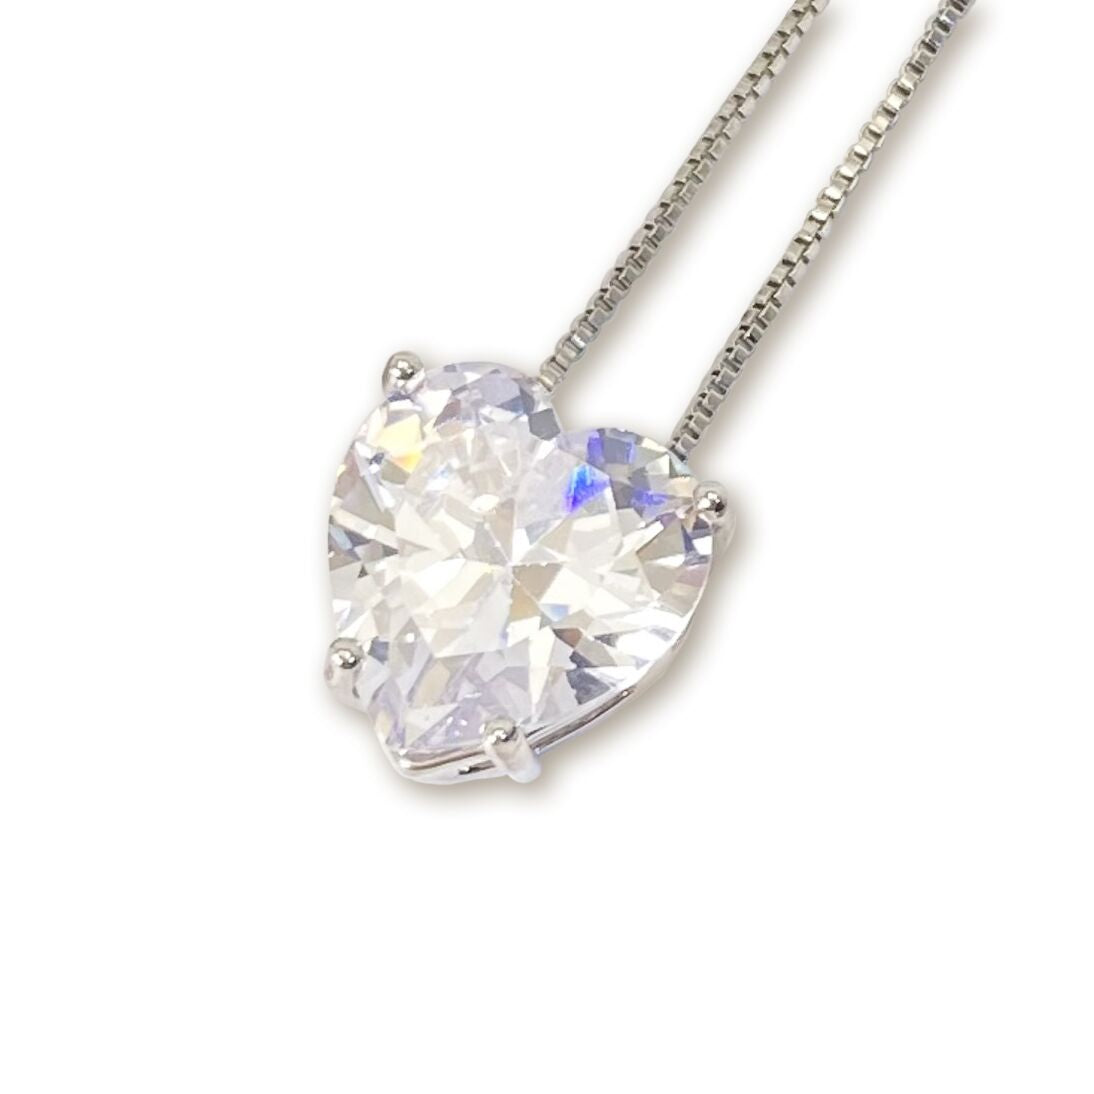 HEART STUD NECKLACE | White Rhodium Plated